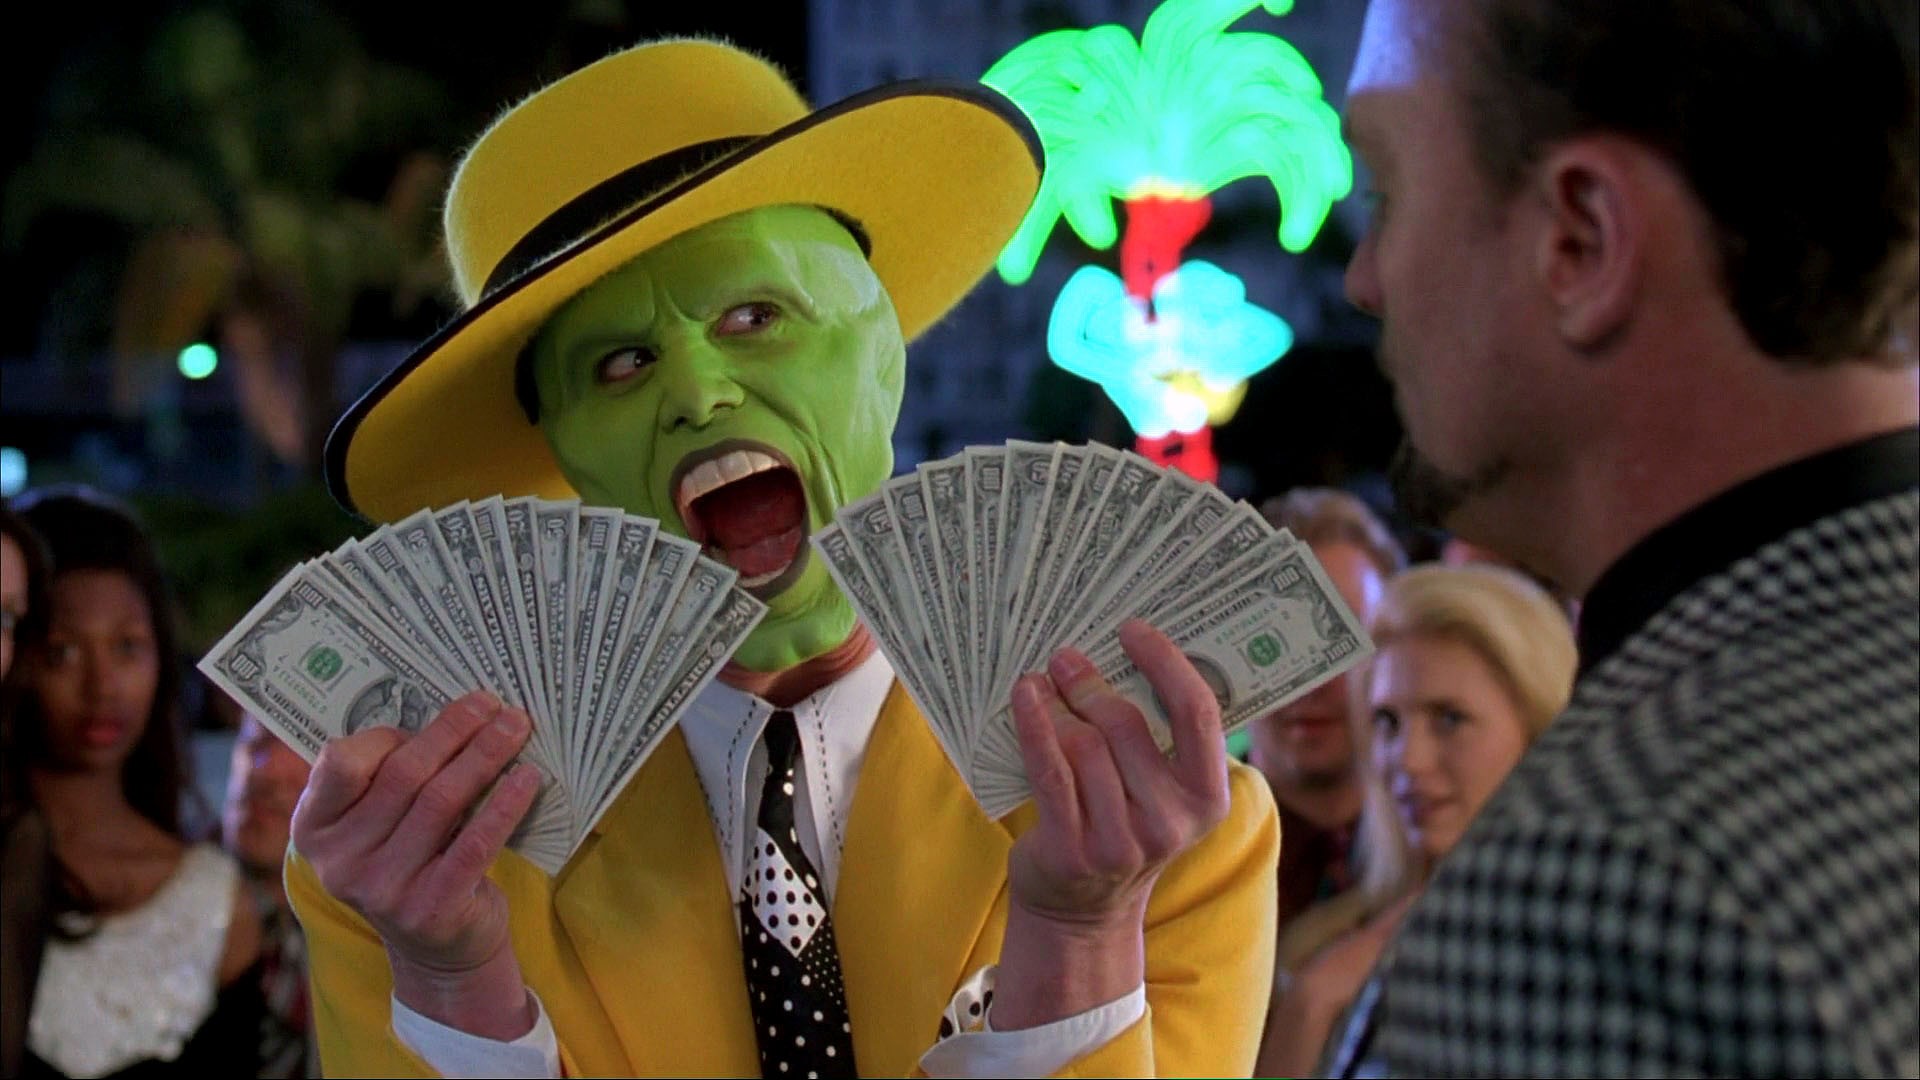 People 1920x1080 The Mask money film stills Jim Carrey mask suits green movie scenes humor movies